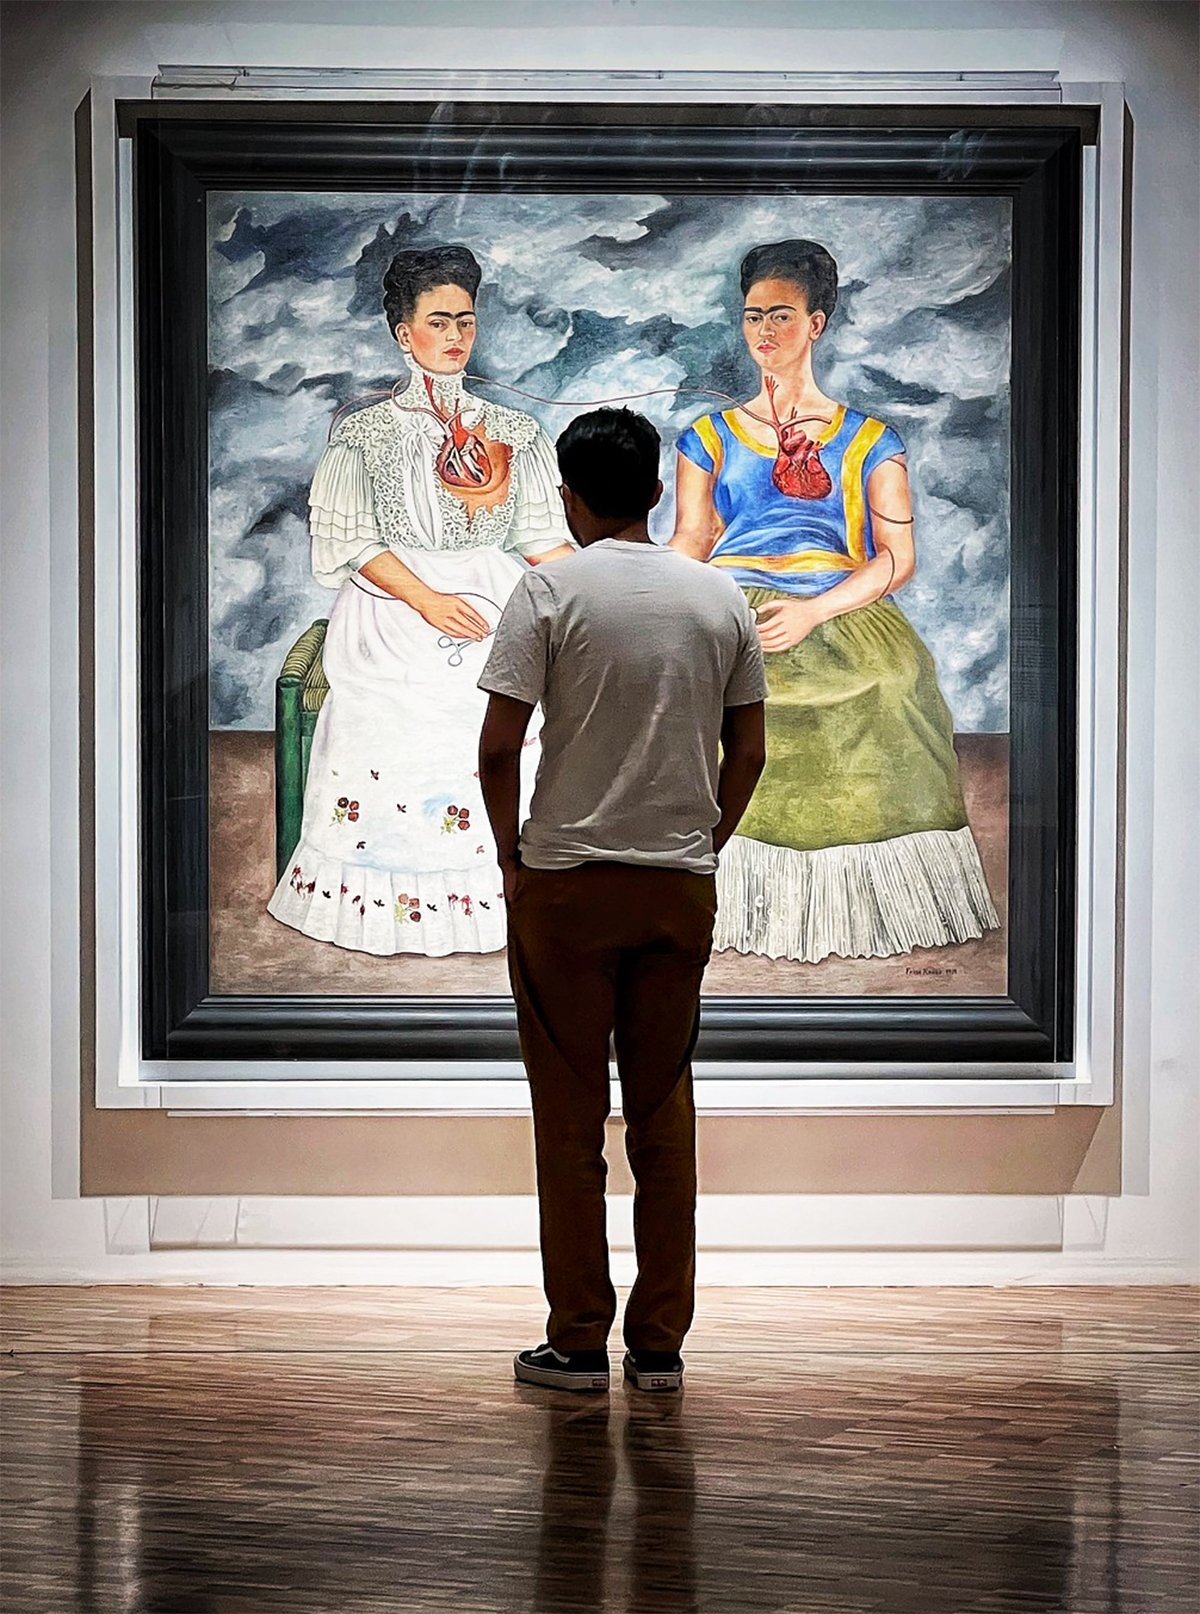 This image shows a person viewing "The Two Fridas" painting by Frida Kahlo on display at Museo de Arte Moderno in Mexico City. The viewer is standing with their back to the camera, providing a sense of scale to the artwork. The large painting features two self-portraits of Frida Kahlo sitting side by side against a stormy sky background. The person observing the painting is dressed casually in a white t-shirt and black pants, focusing intently on the details of the artwork.